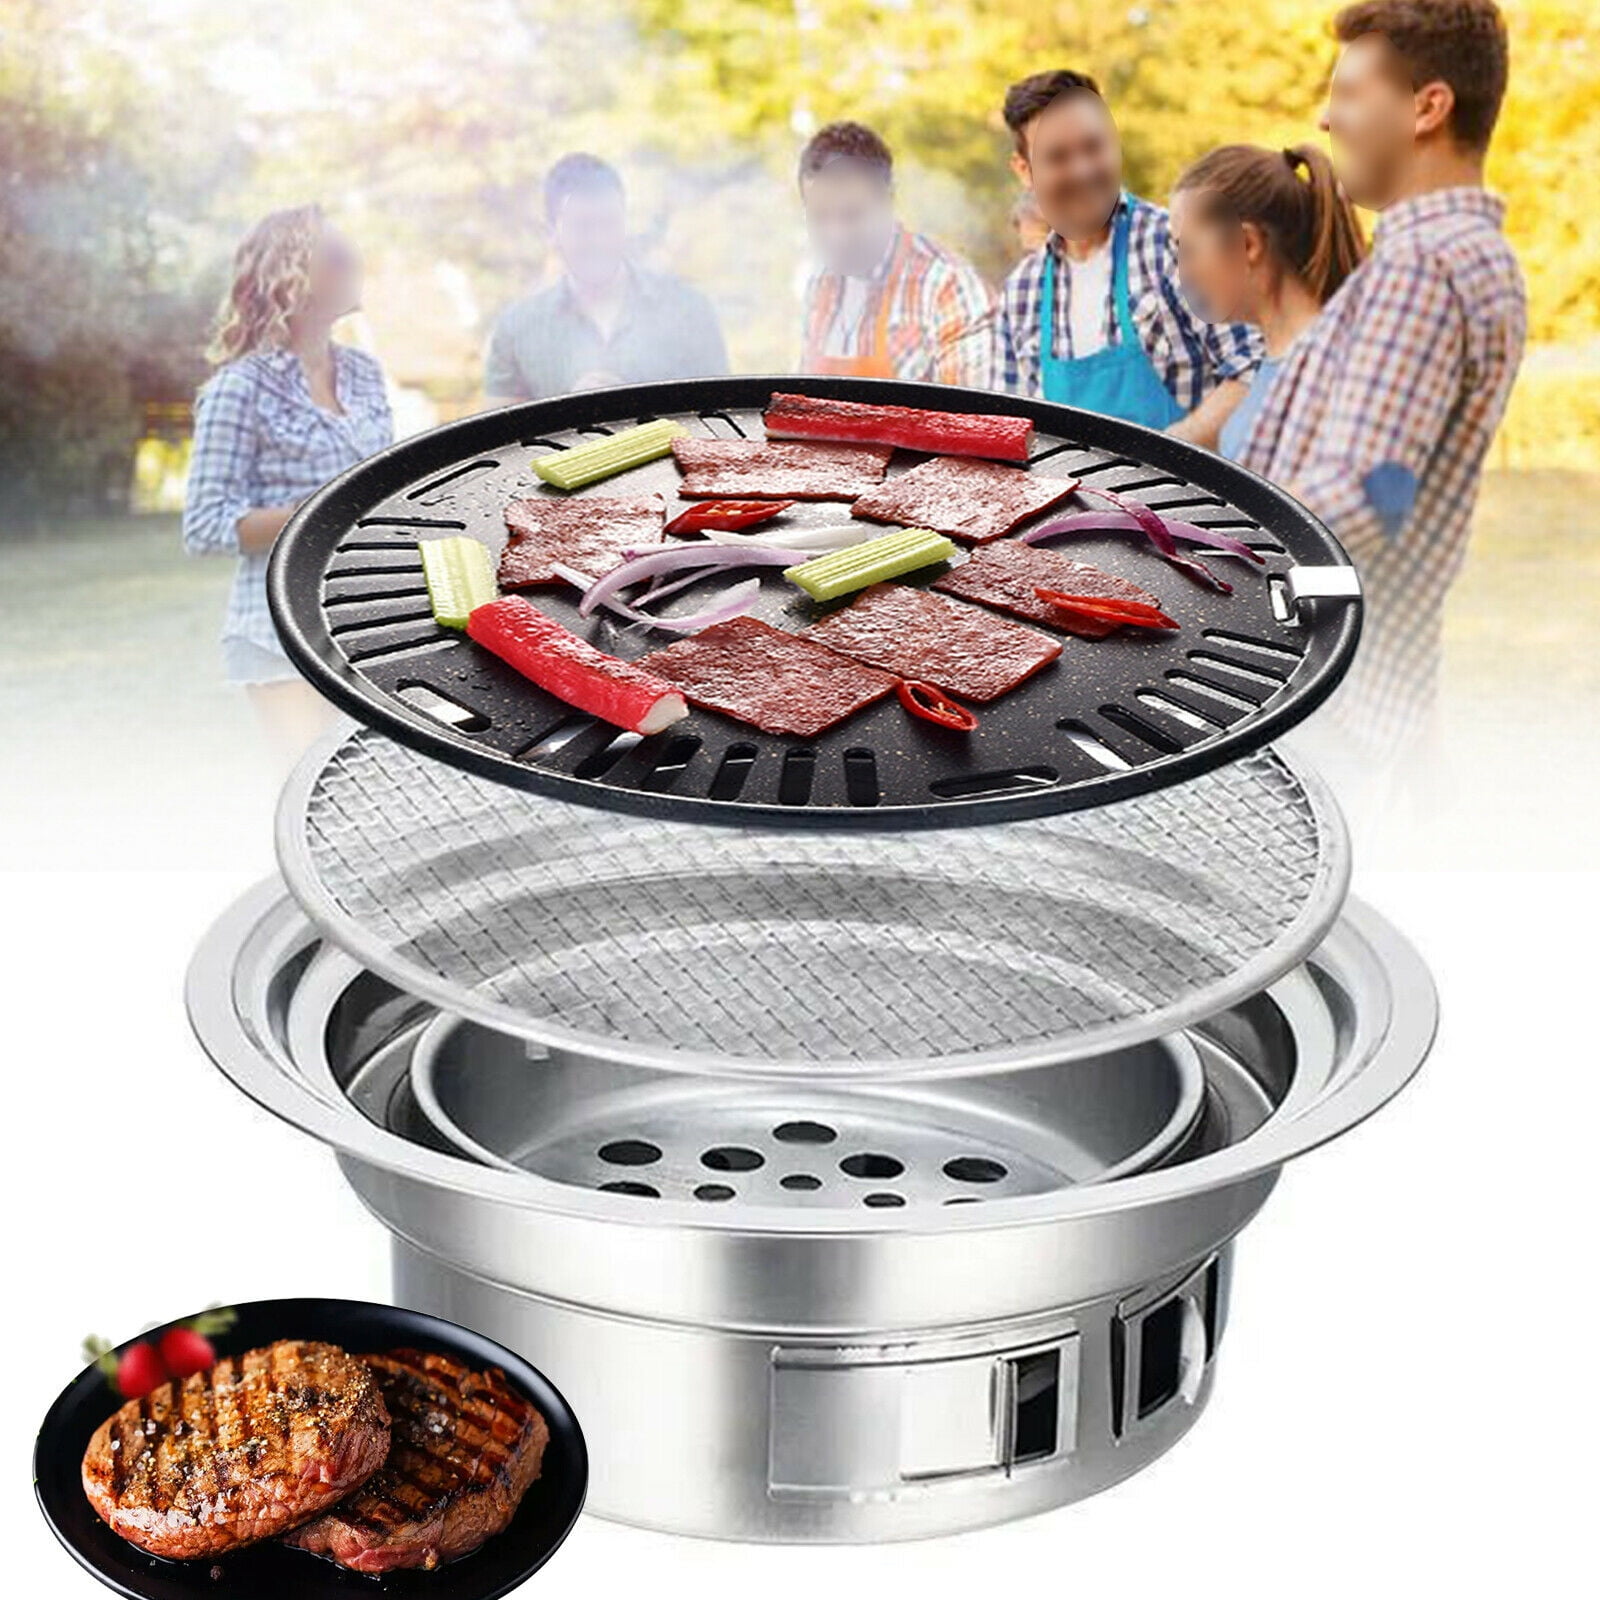 Portable Table Grill, Korean Style BBQ Grill Stainless Steel BBQ Grill  Stove Outdoor Camping Cooker Charcoal Grill BBQ Round Barbecue Grill